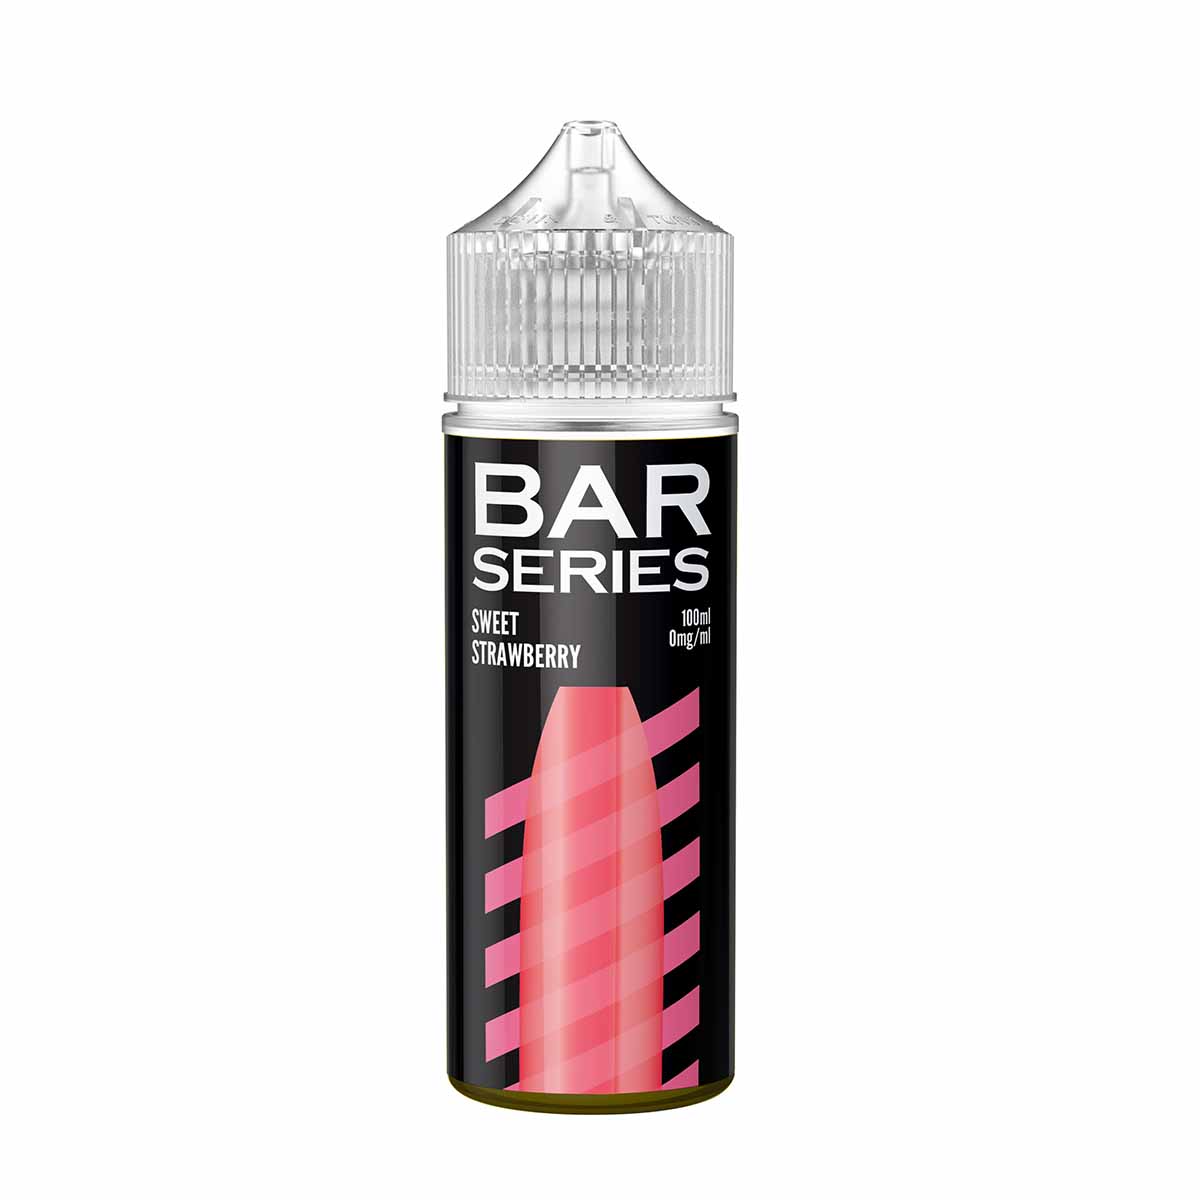 Sweet Strawberry by Bar Series Short Fill 100ml